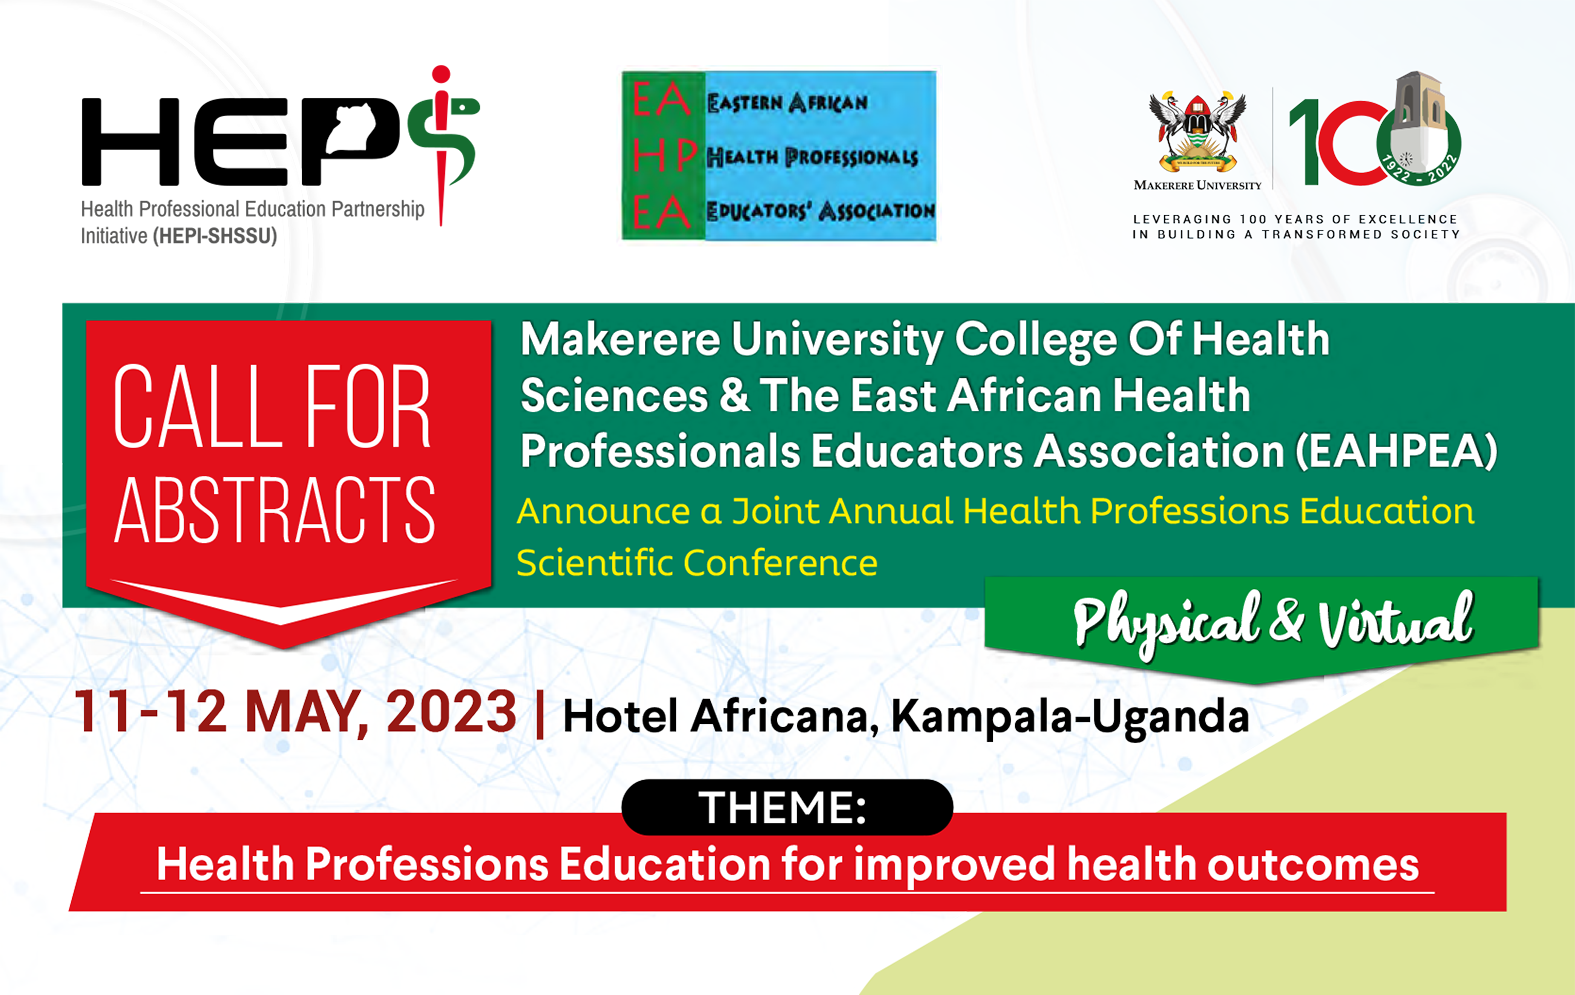 Call for Abstracts: Joint Annual Health Professions Education Scientific Conference. Deadline: 15th April 2023.